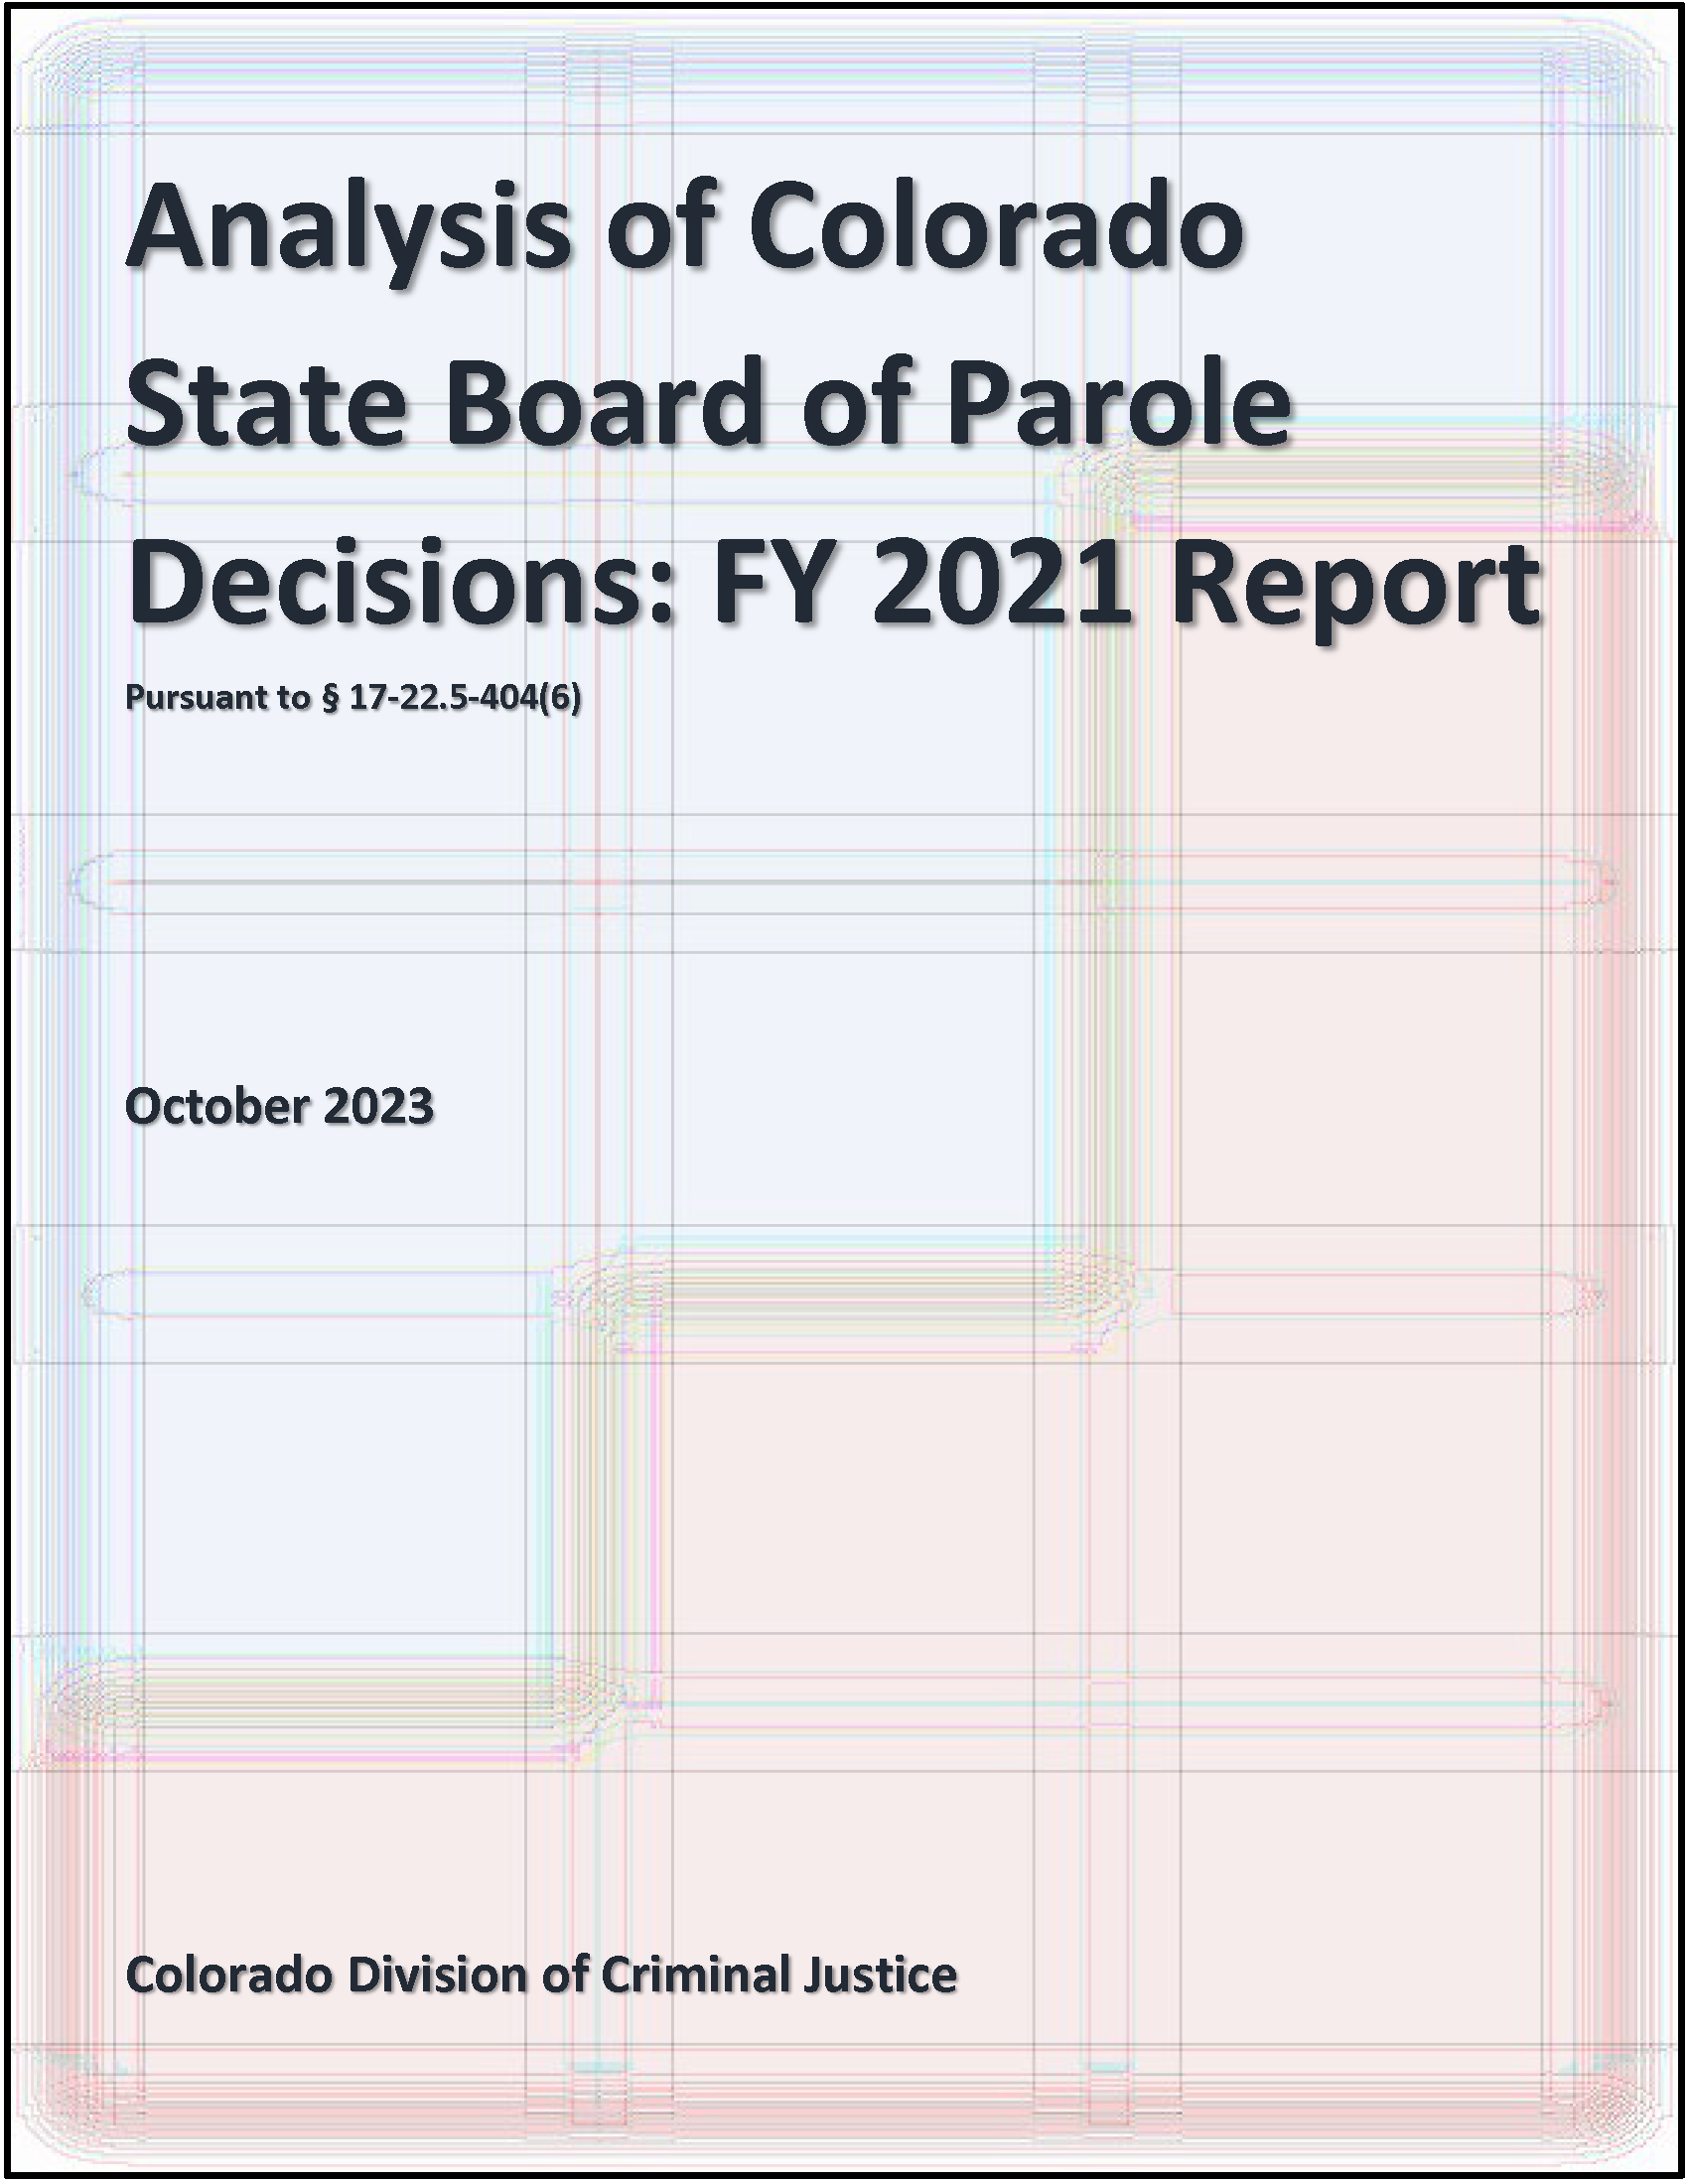 Analysis of Colorado State Board of Parole Decisions: FY 2021 Report (October 2023)